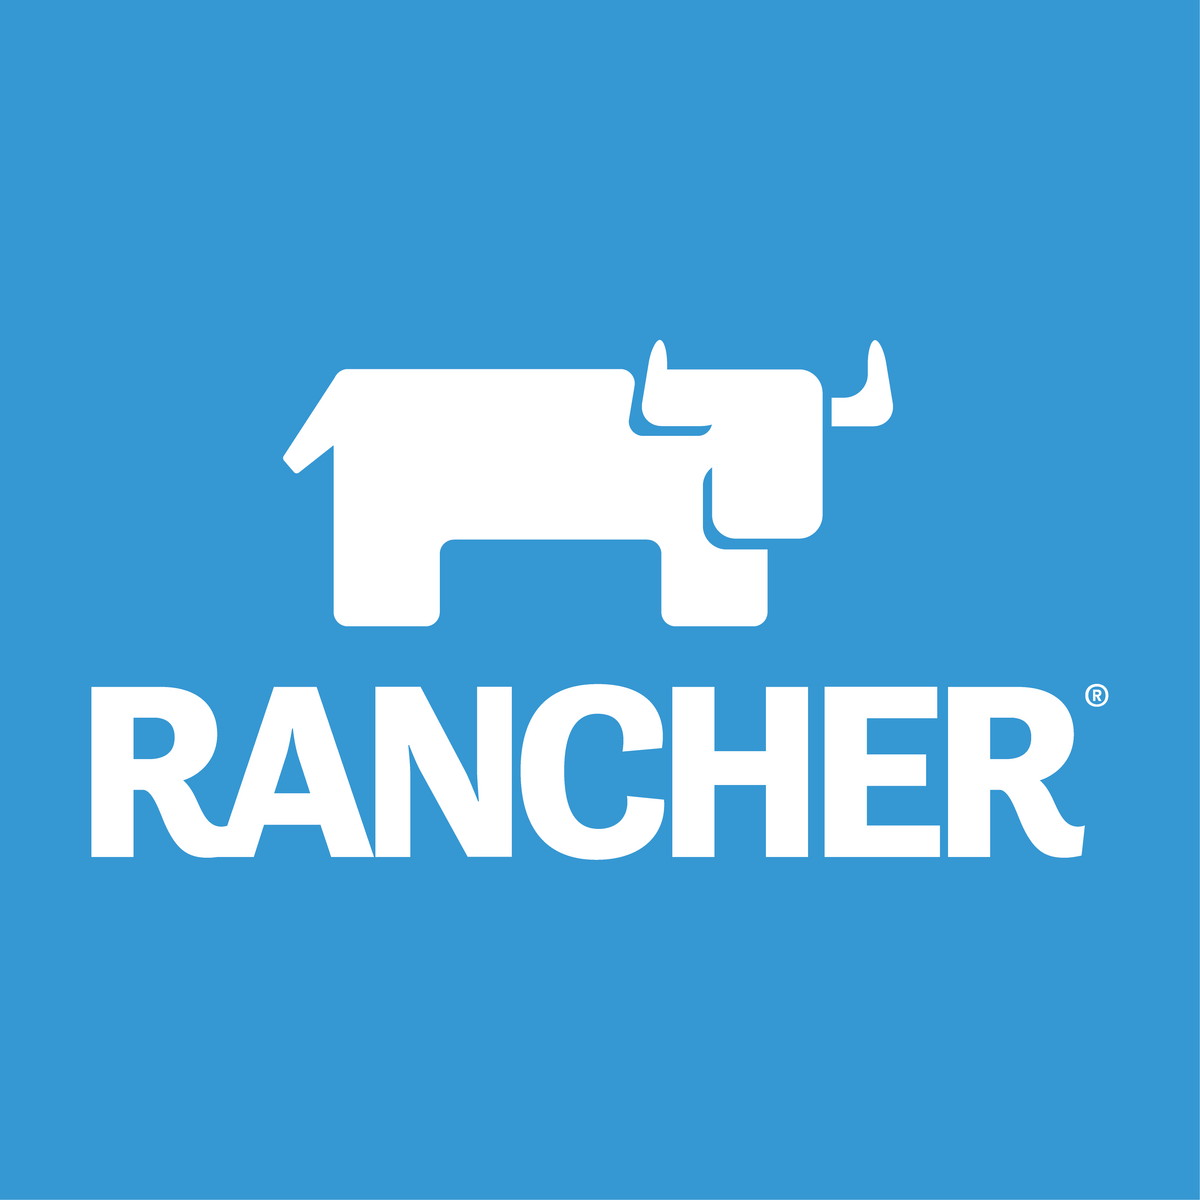 SUSE has signed a final agreement to acquire Rancher Labs